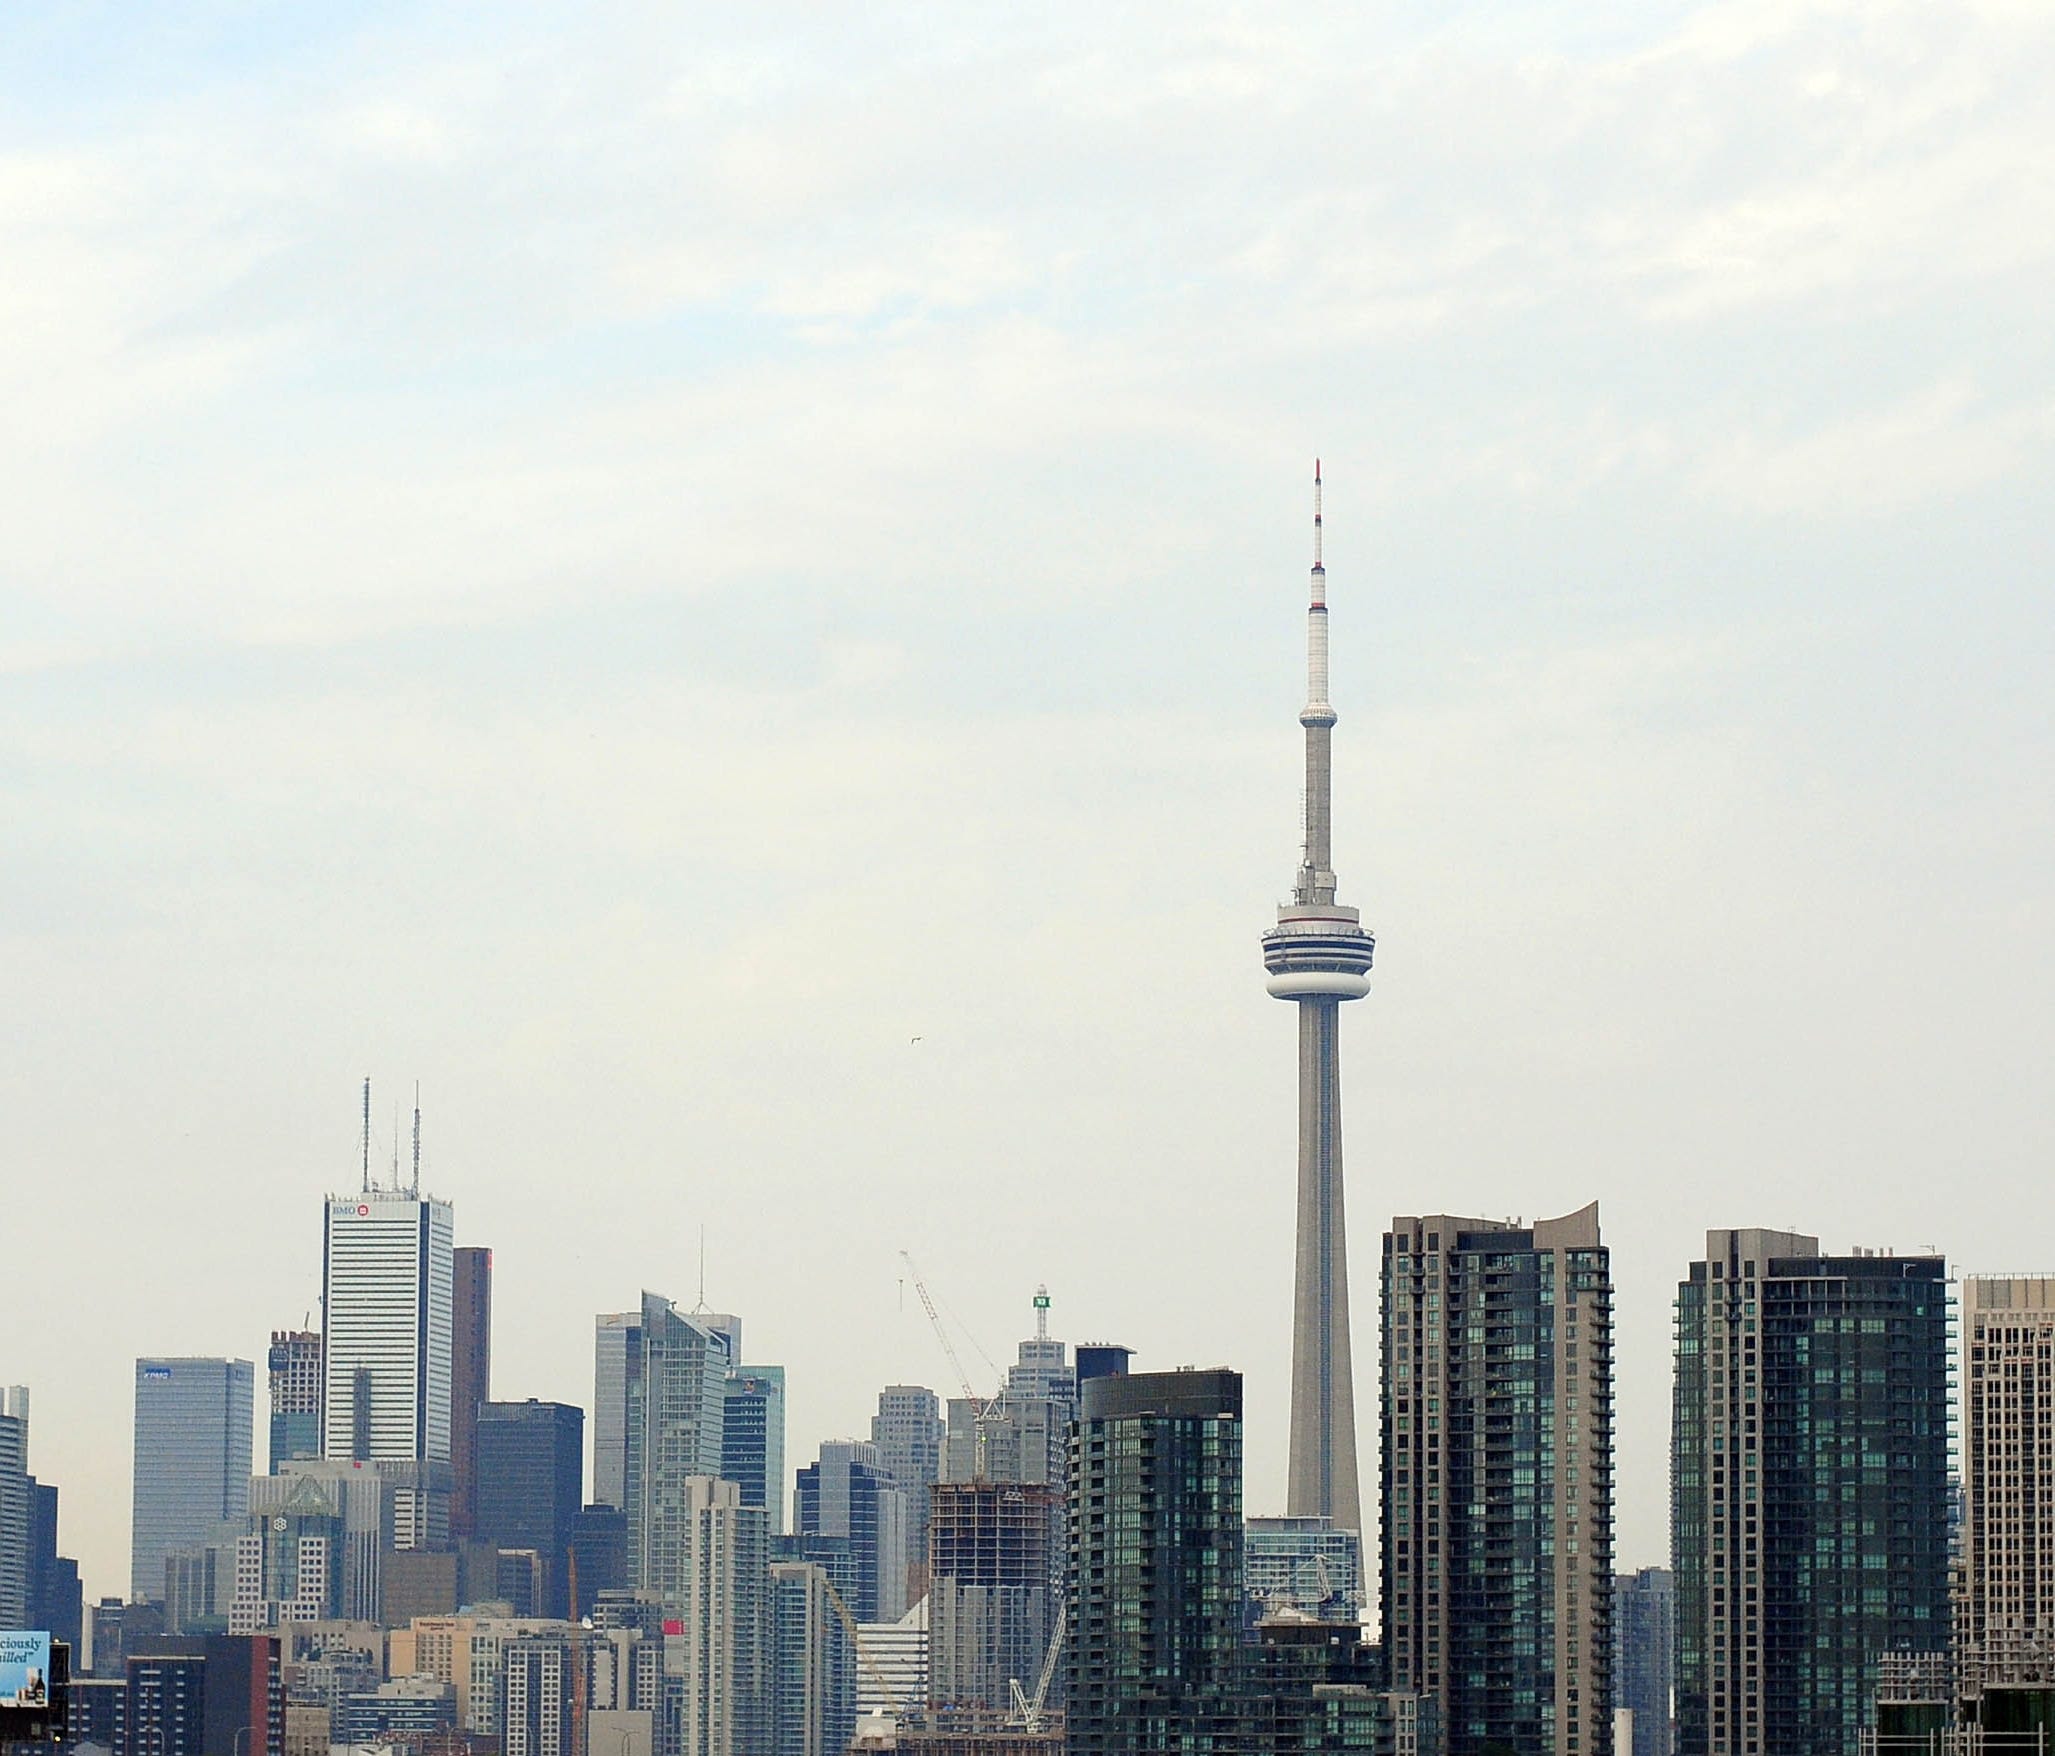 Toronto was ranked as the sixth best market for tech jobs as well as one of the cheapest markets for the highest quality workers.